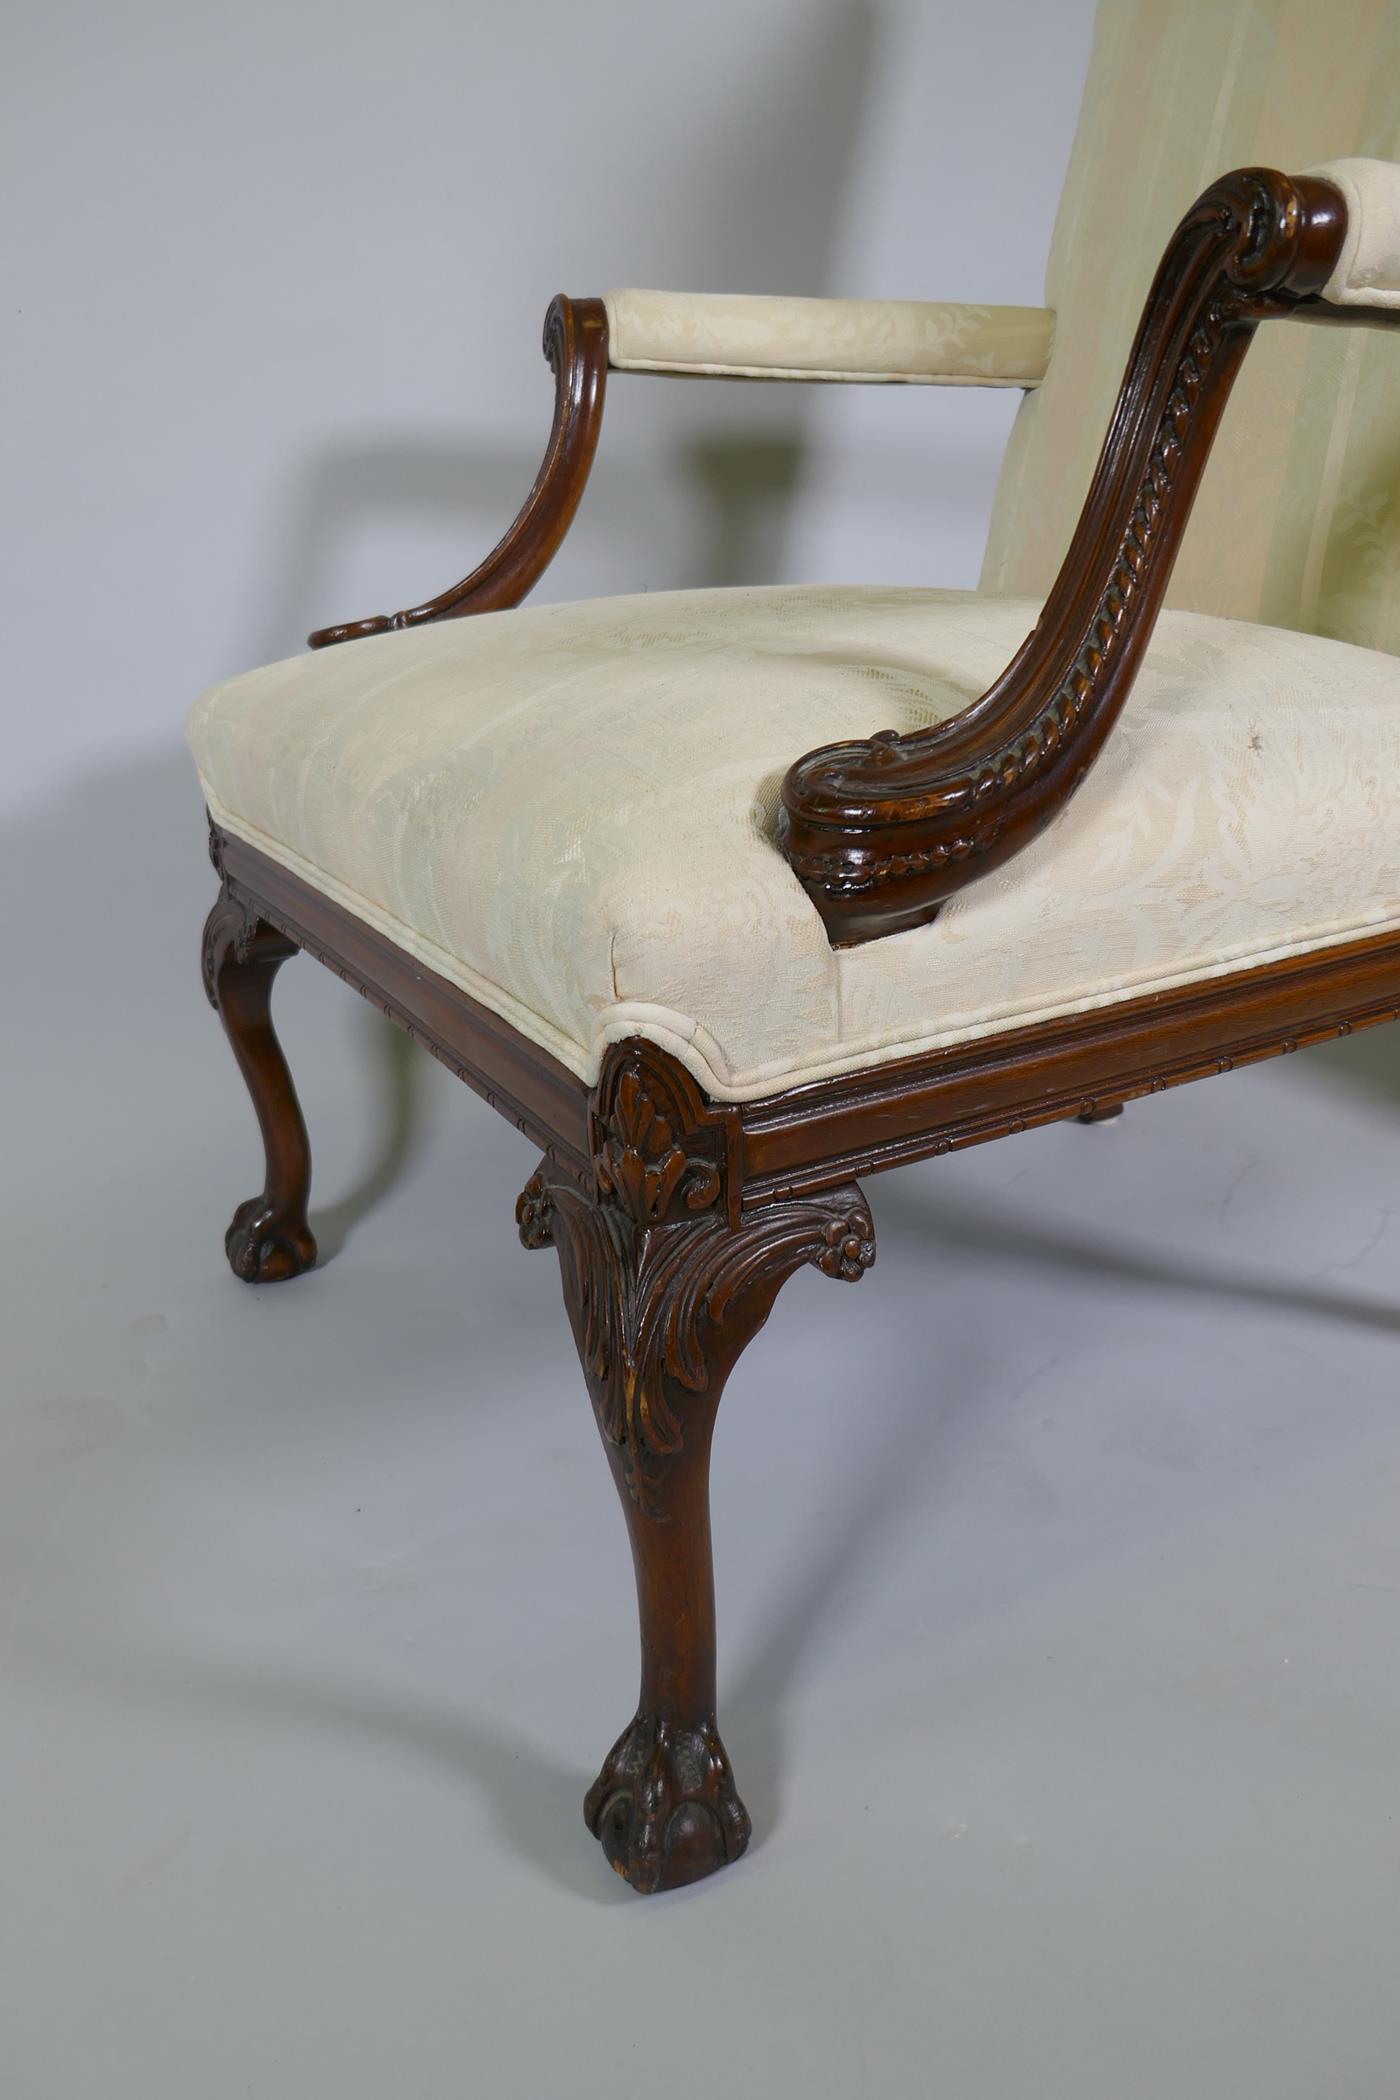 A pr of C18th style Gainsborough chairs with carved decoration and hump backs, raised on cabriole - Image 3 of 5